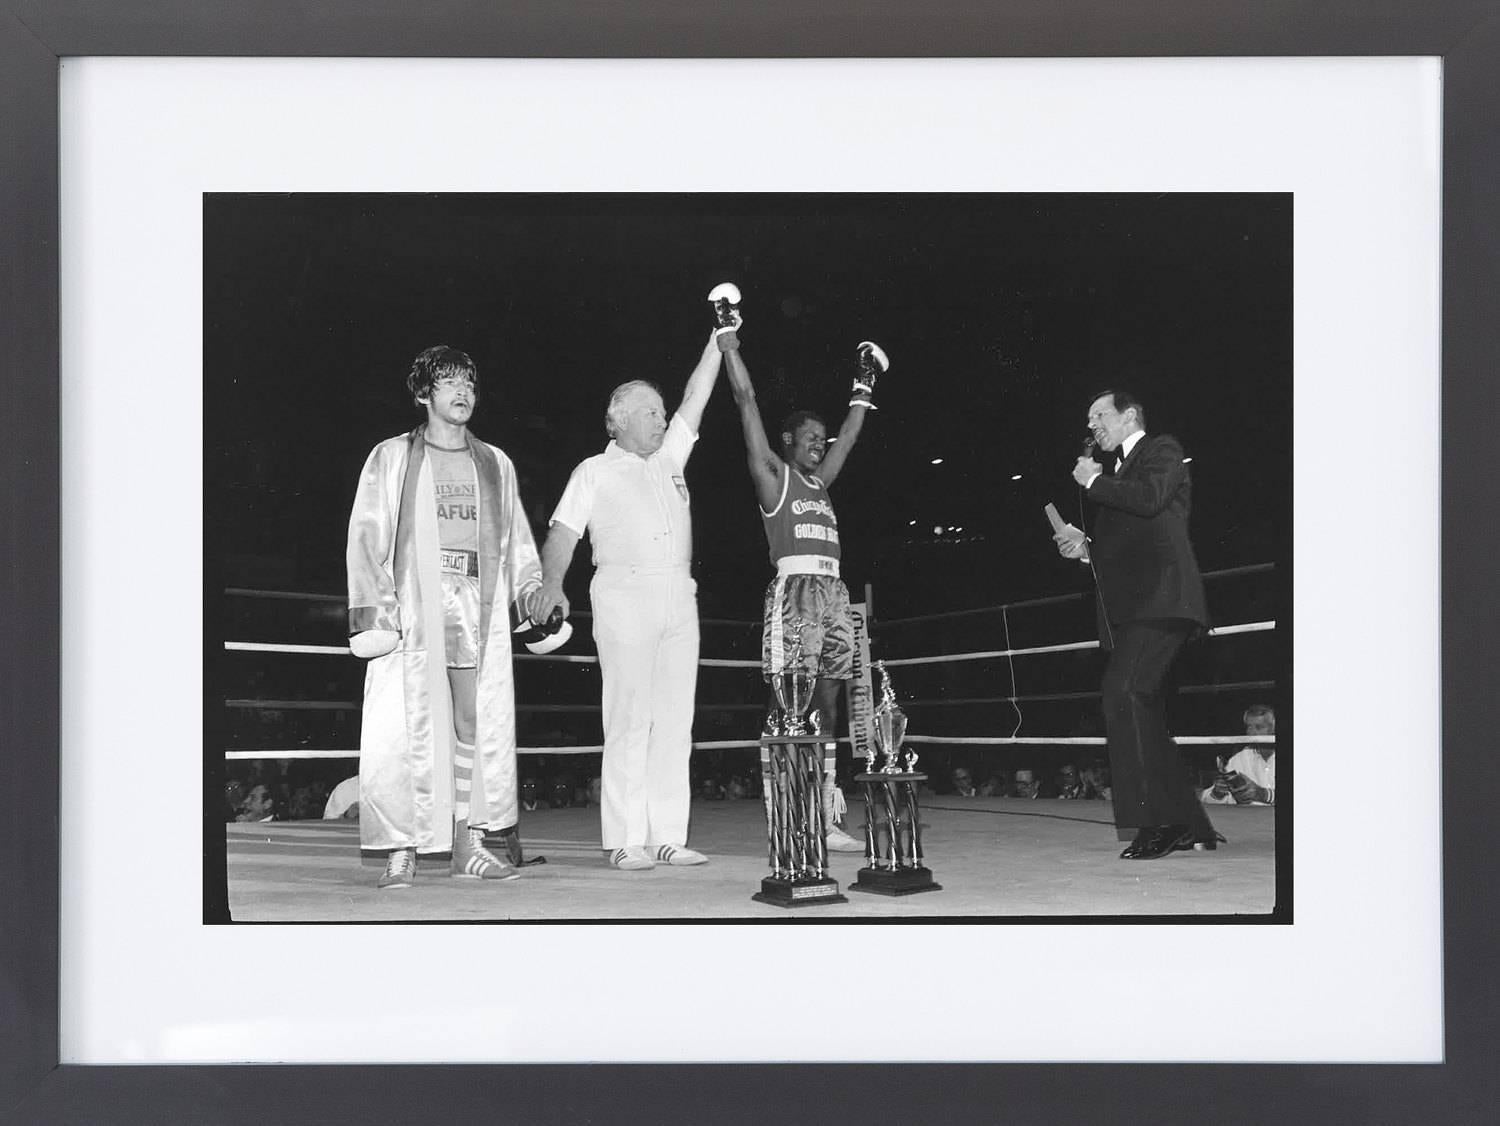 Phil Mascione Black and White Photograph - Chicago Vintage 1980s Boxing Photos